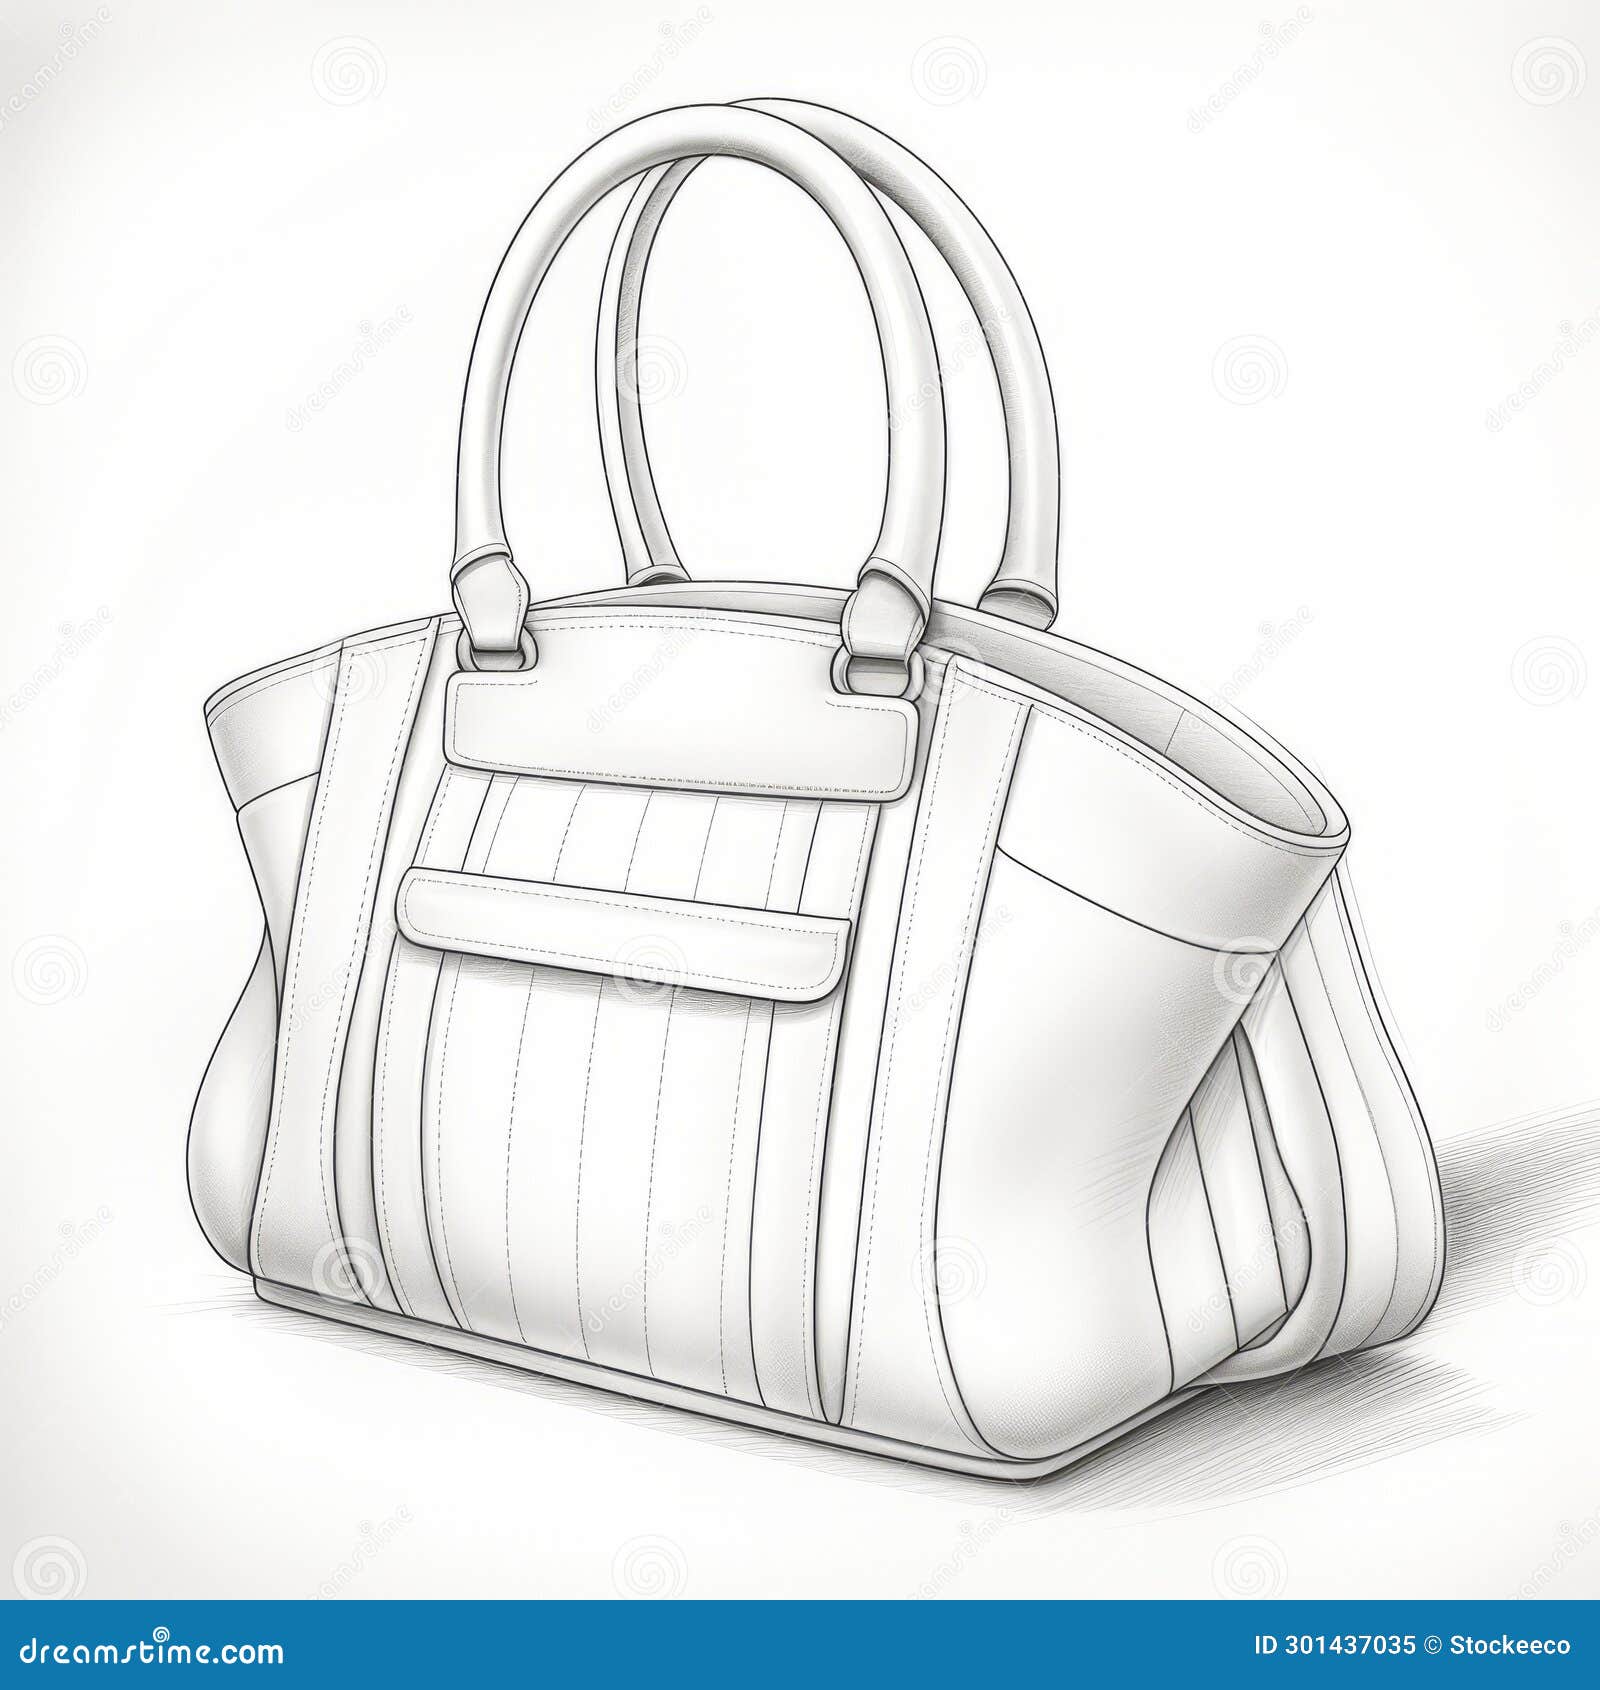 390+ Designer Handbag Drawings Stock Photos, Pictures & Royalty-Free Images  - iStock